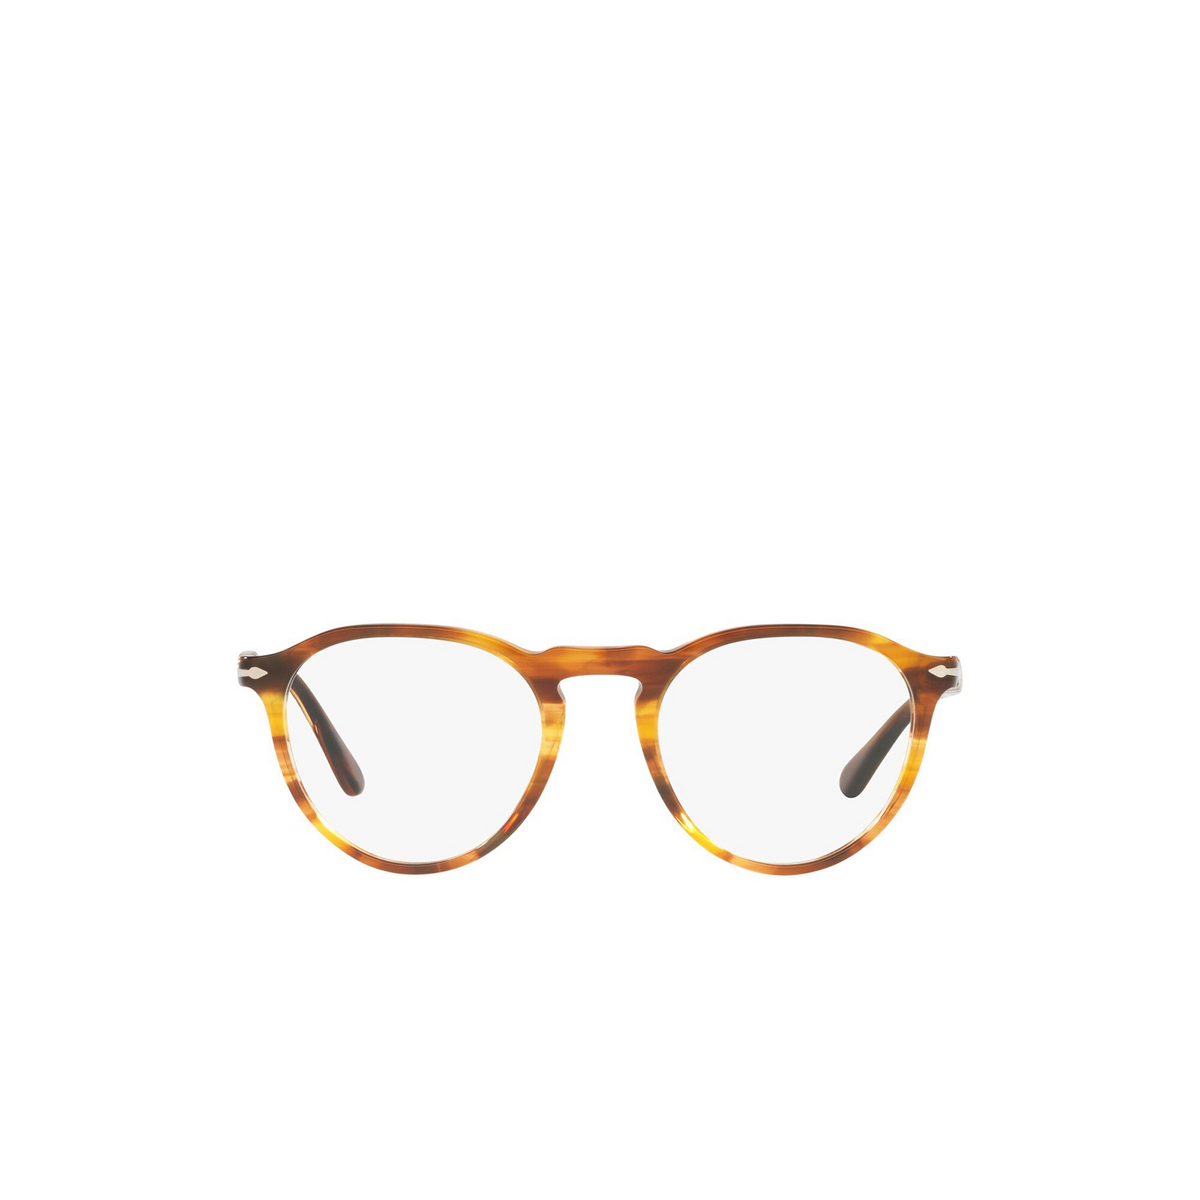 Persol® Round Eyeglasses: PO3286V color Striped Red 1157 - front view.